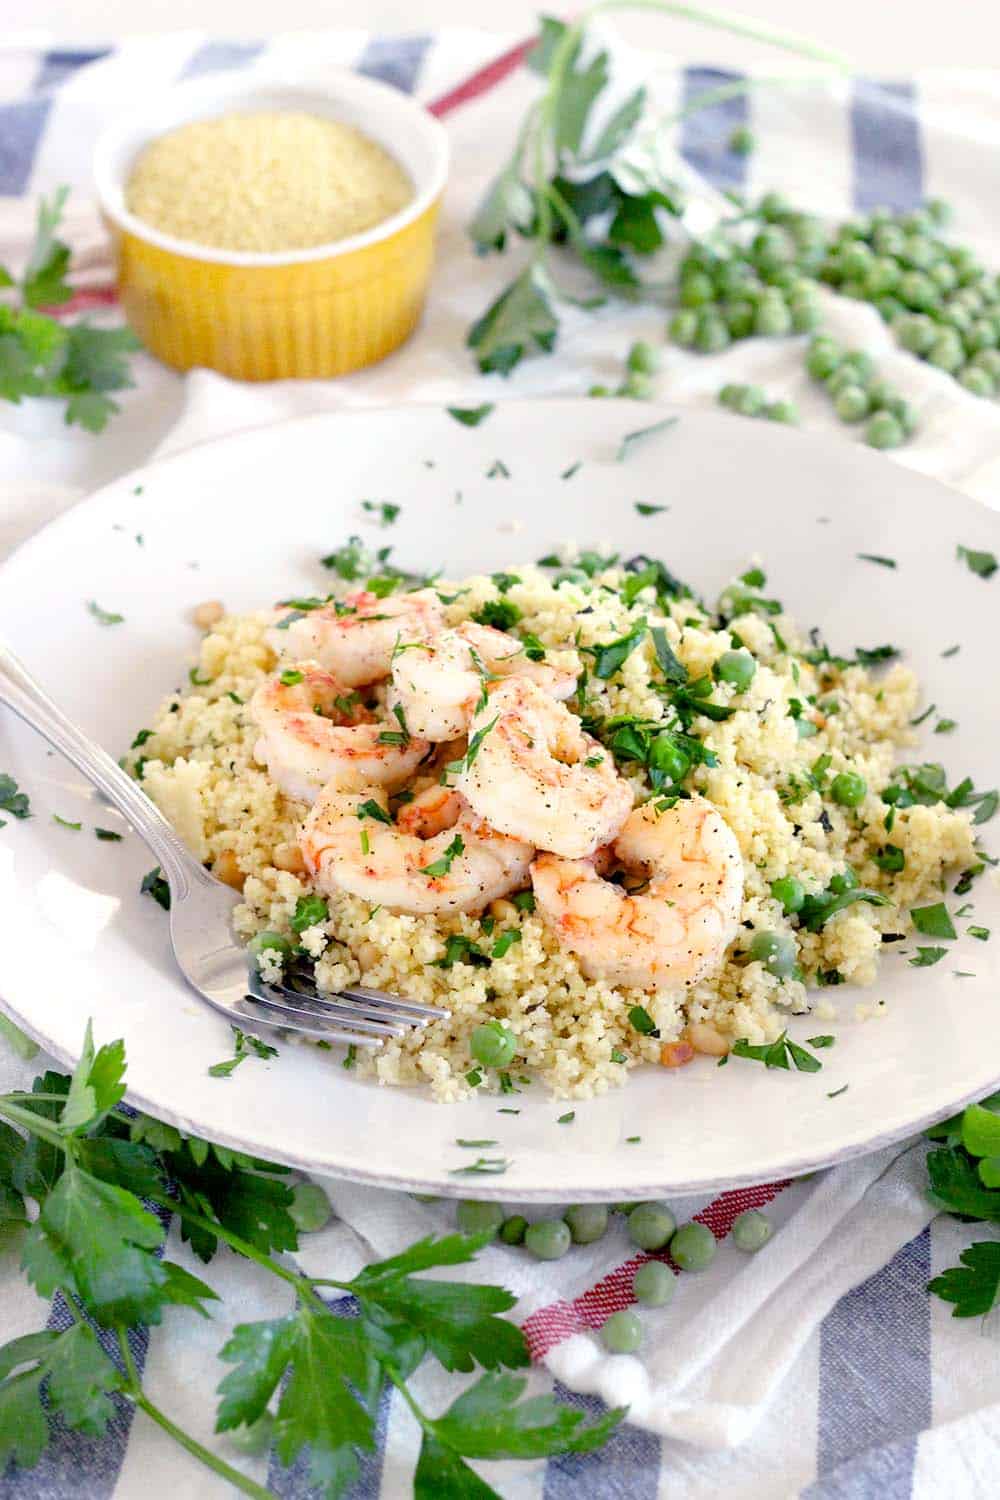 This Shrimp and Couscous with Peas and Mint recipe is a simple, healthy, 20 minute meal that's a cinch to make and perfect for spring!